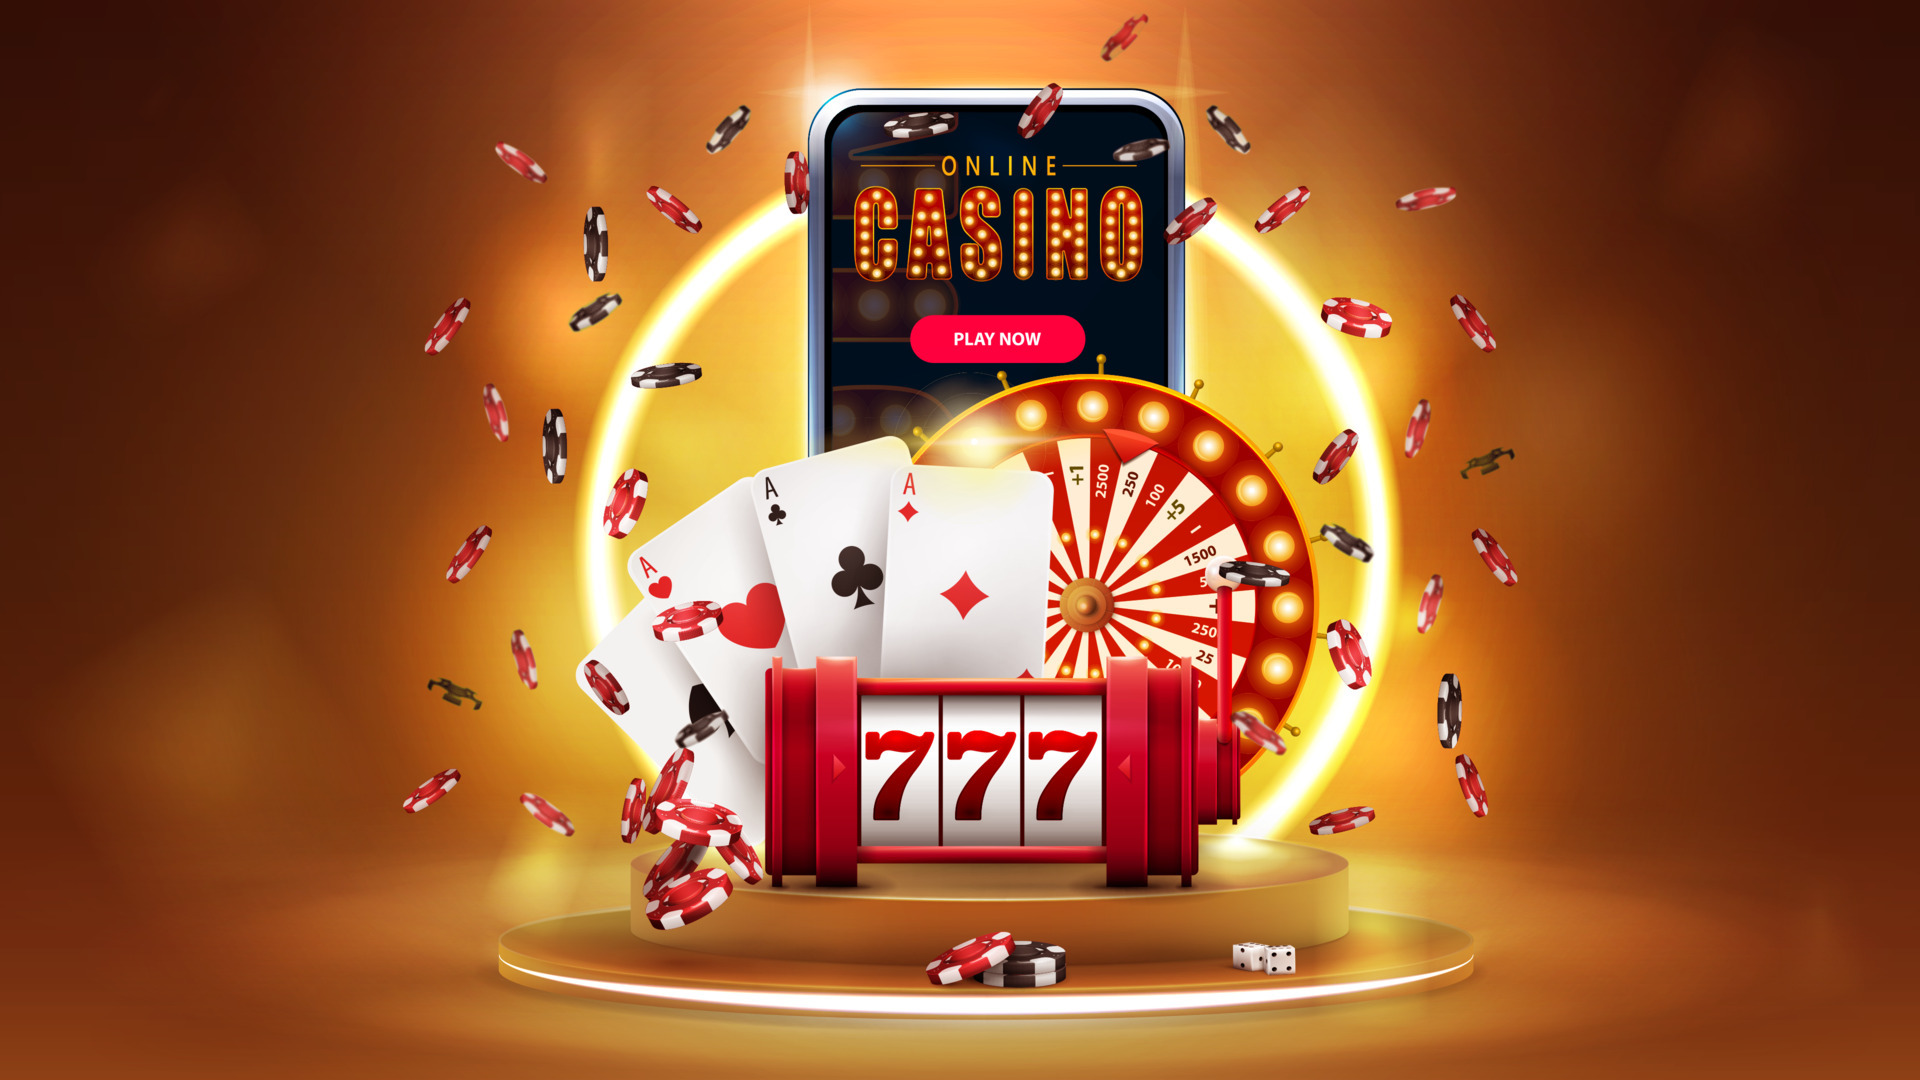 Favorite Slots Online Resources For 2021